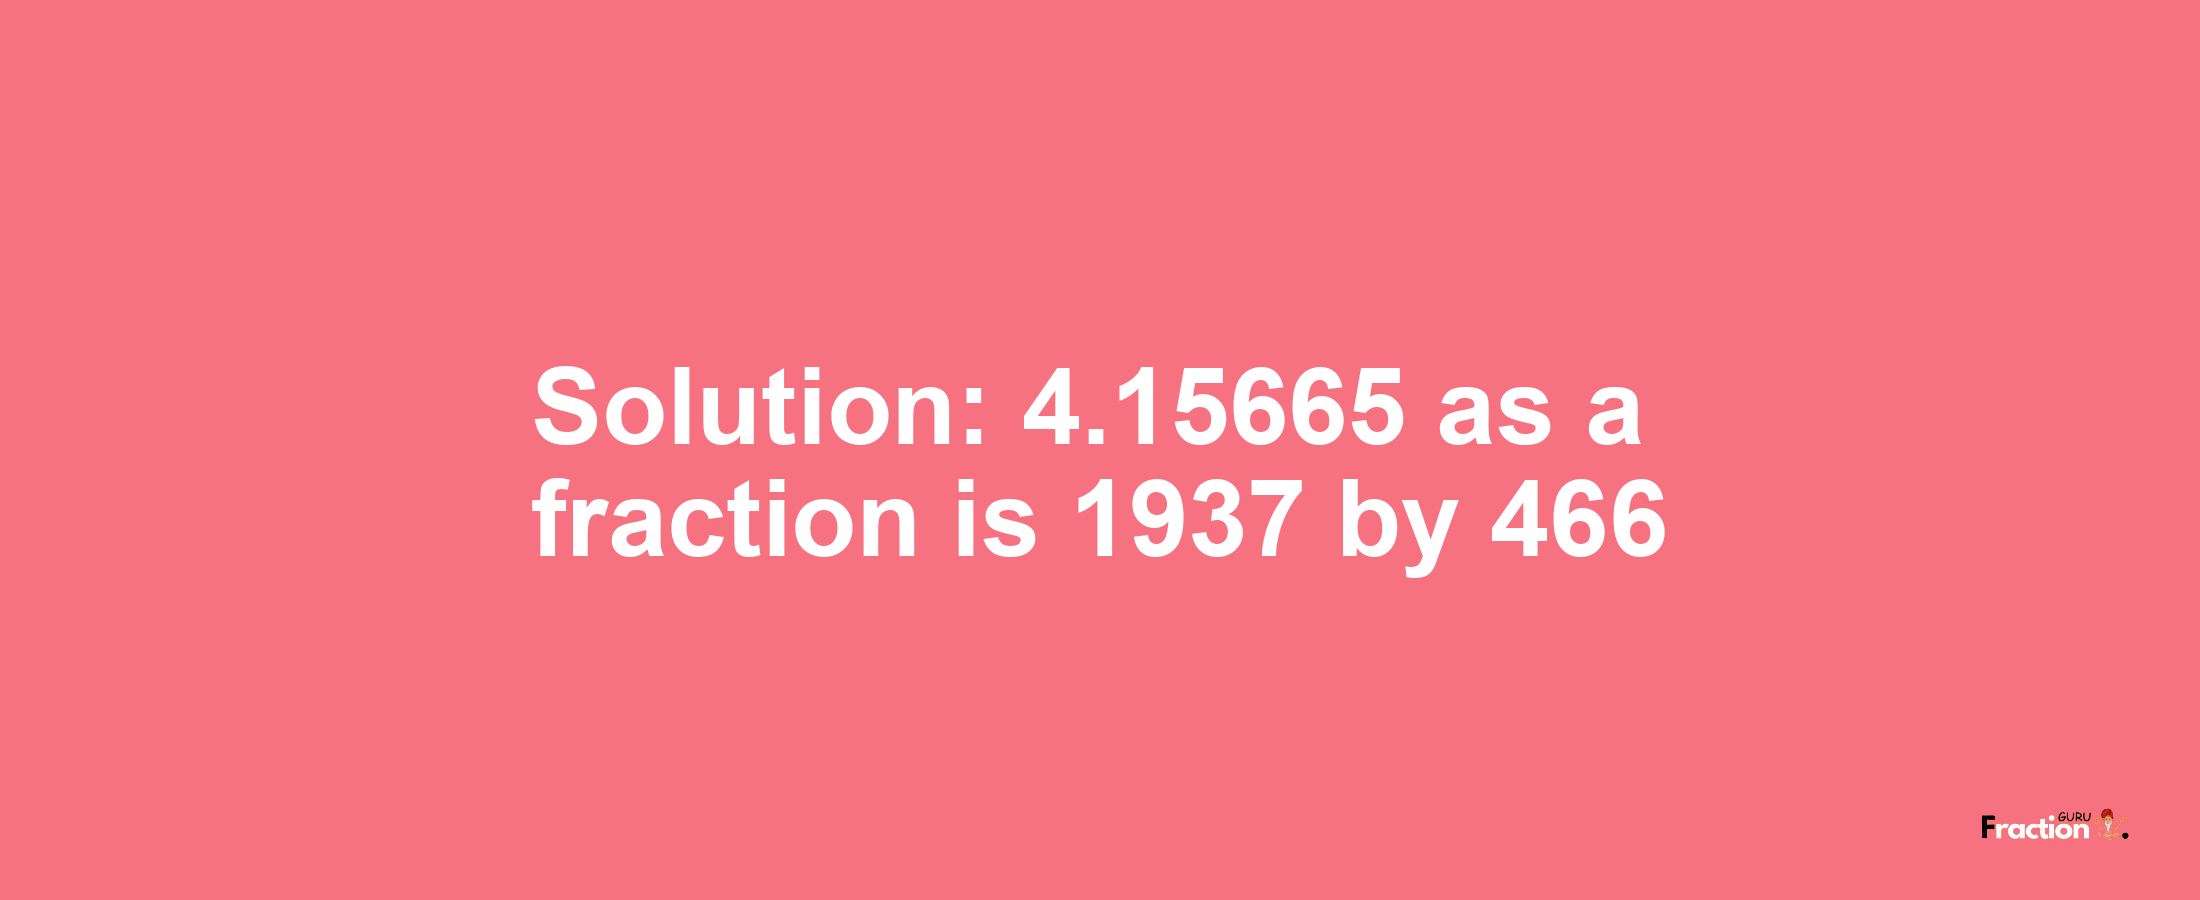 Solution:4.15665 as a fraction is 1937/466